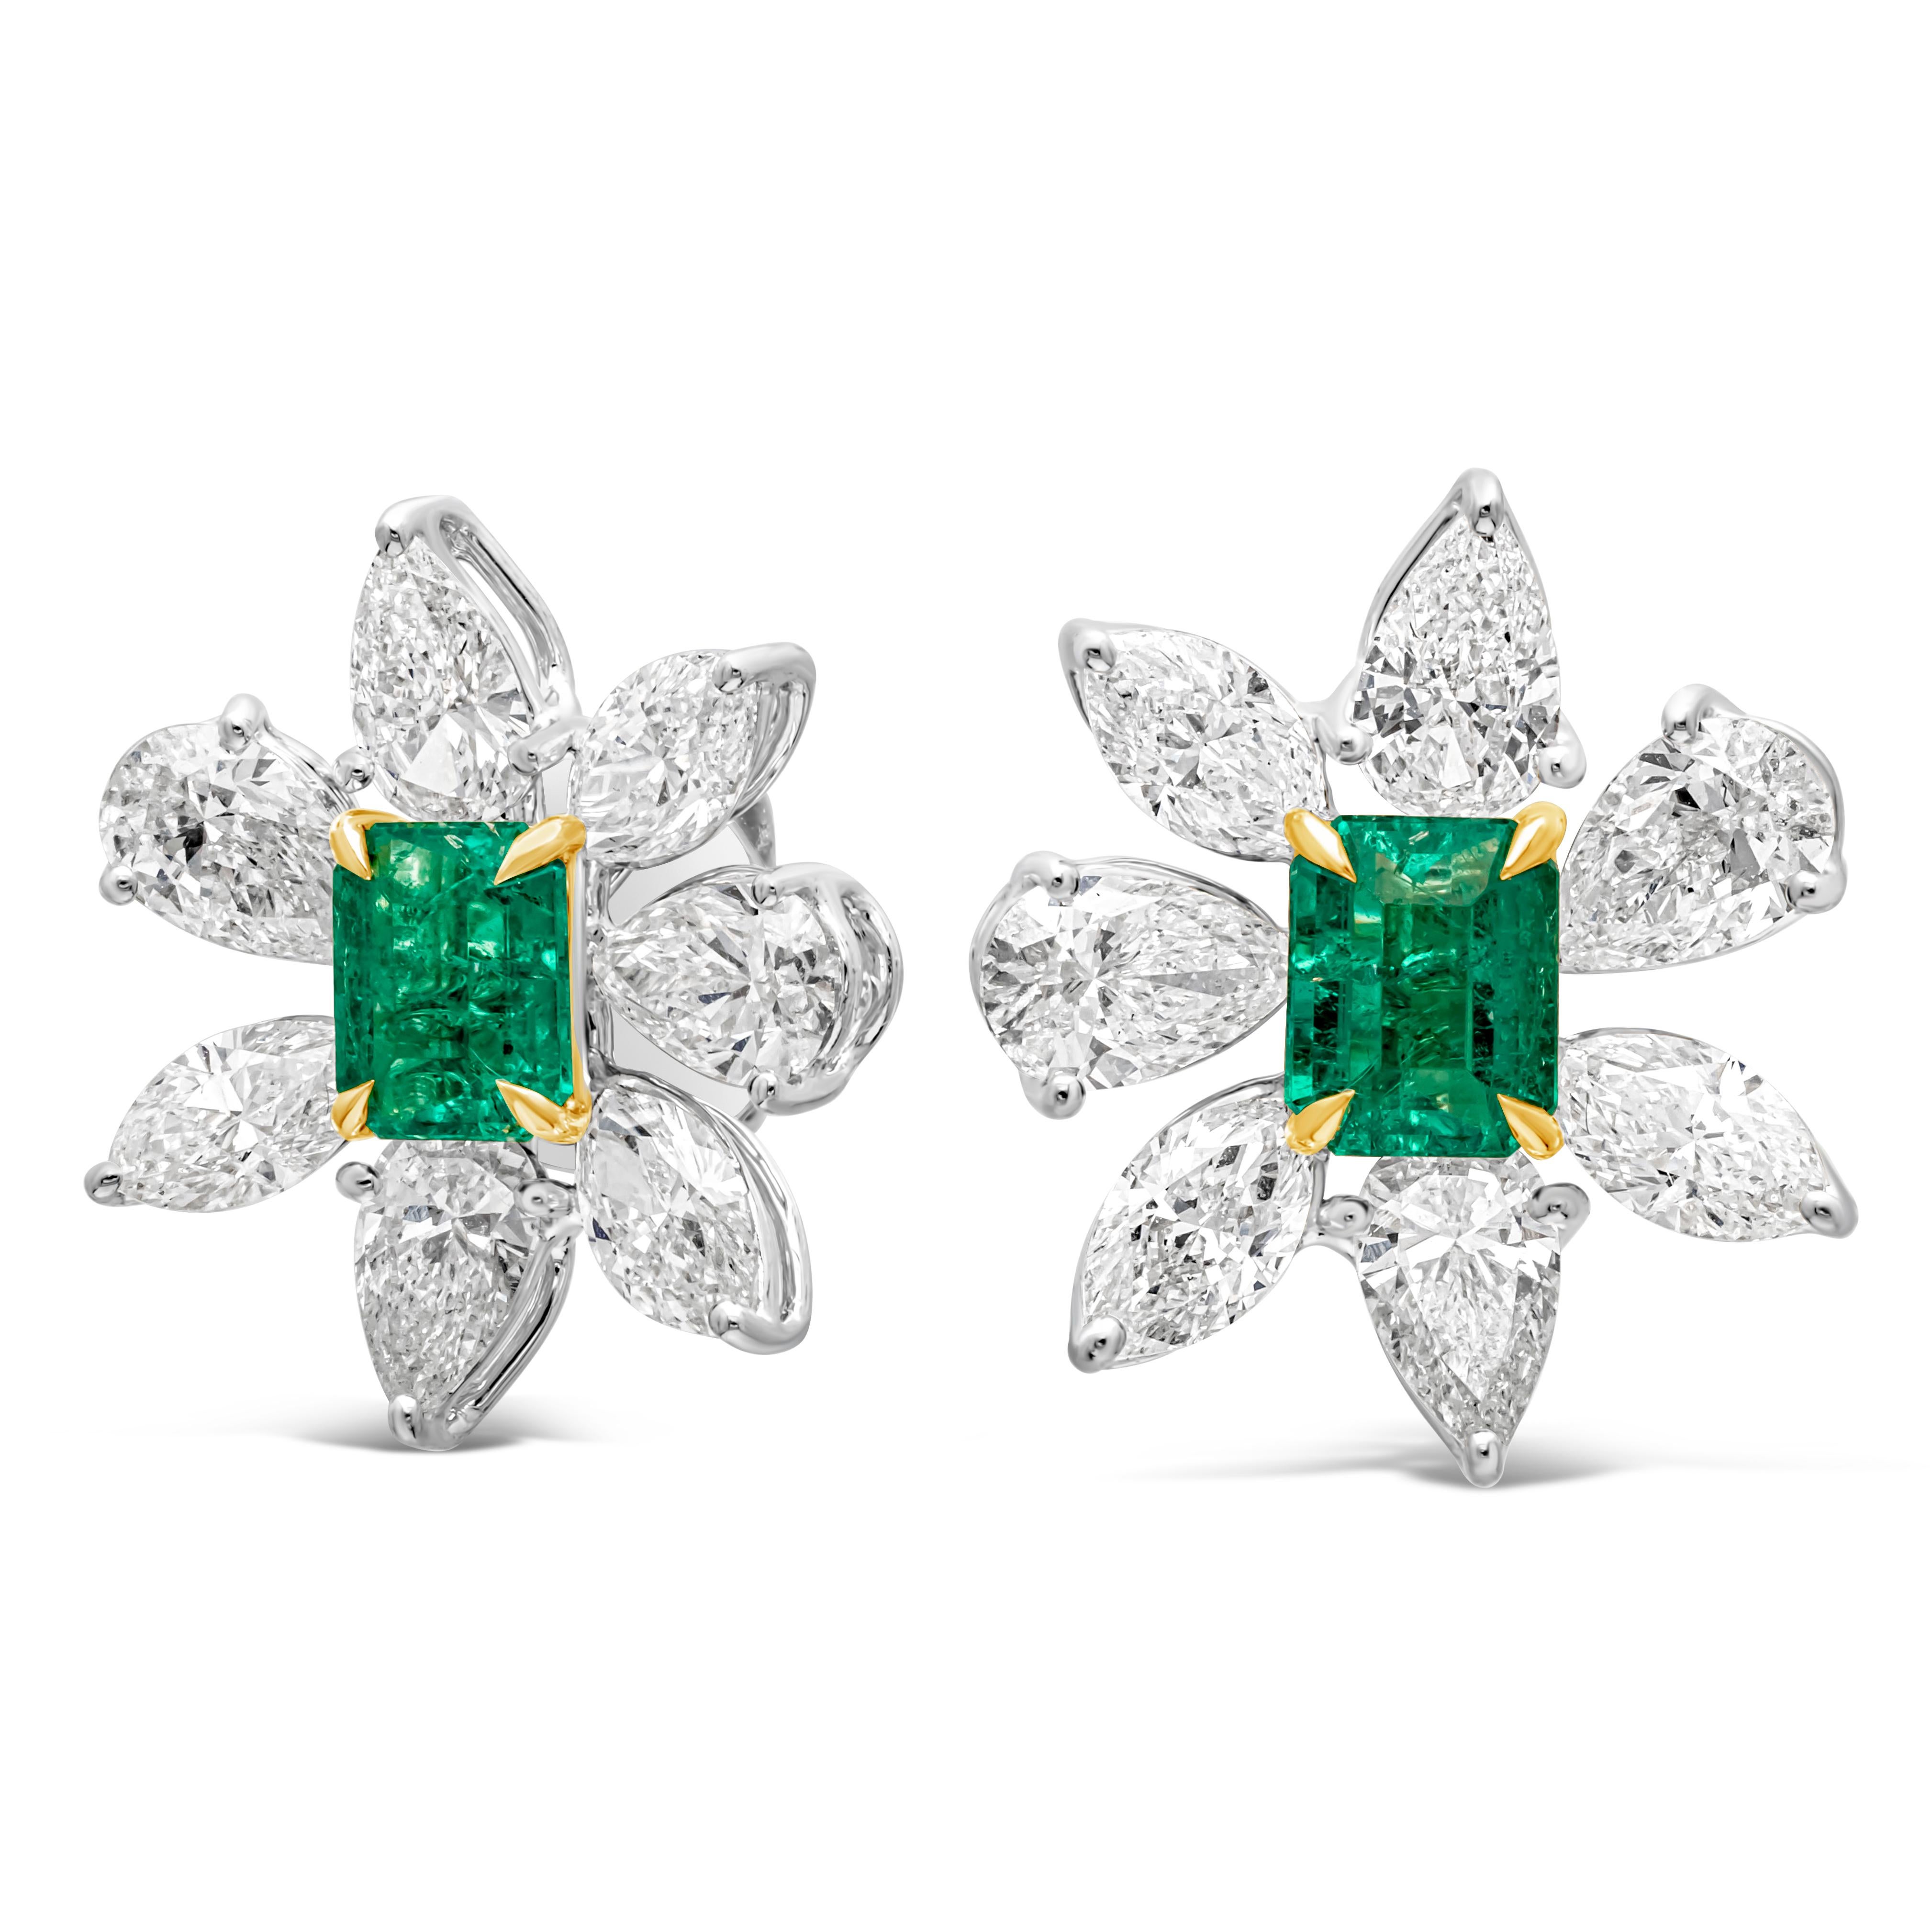 A very beautiful and fashionable pair of stud earrings featuring a radiant cut color-rich green emerald center stone weighing 1.17 carats total, set in a classic four prong basket setting. Surrounded by brilliant pear and marquise shape diamonds set